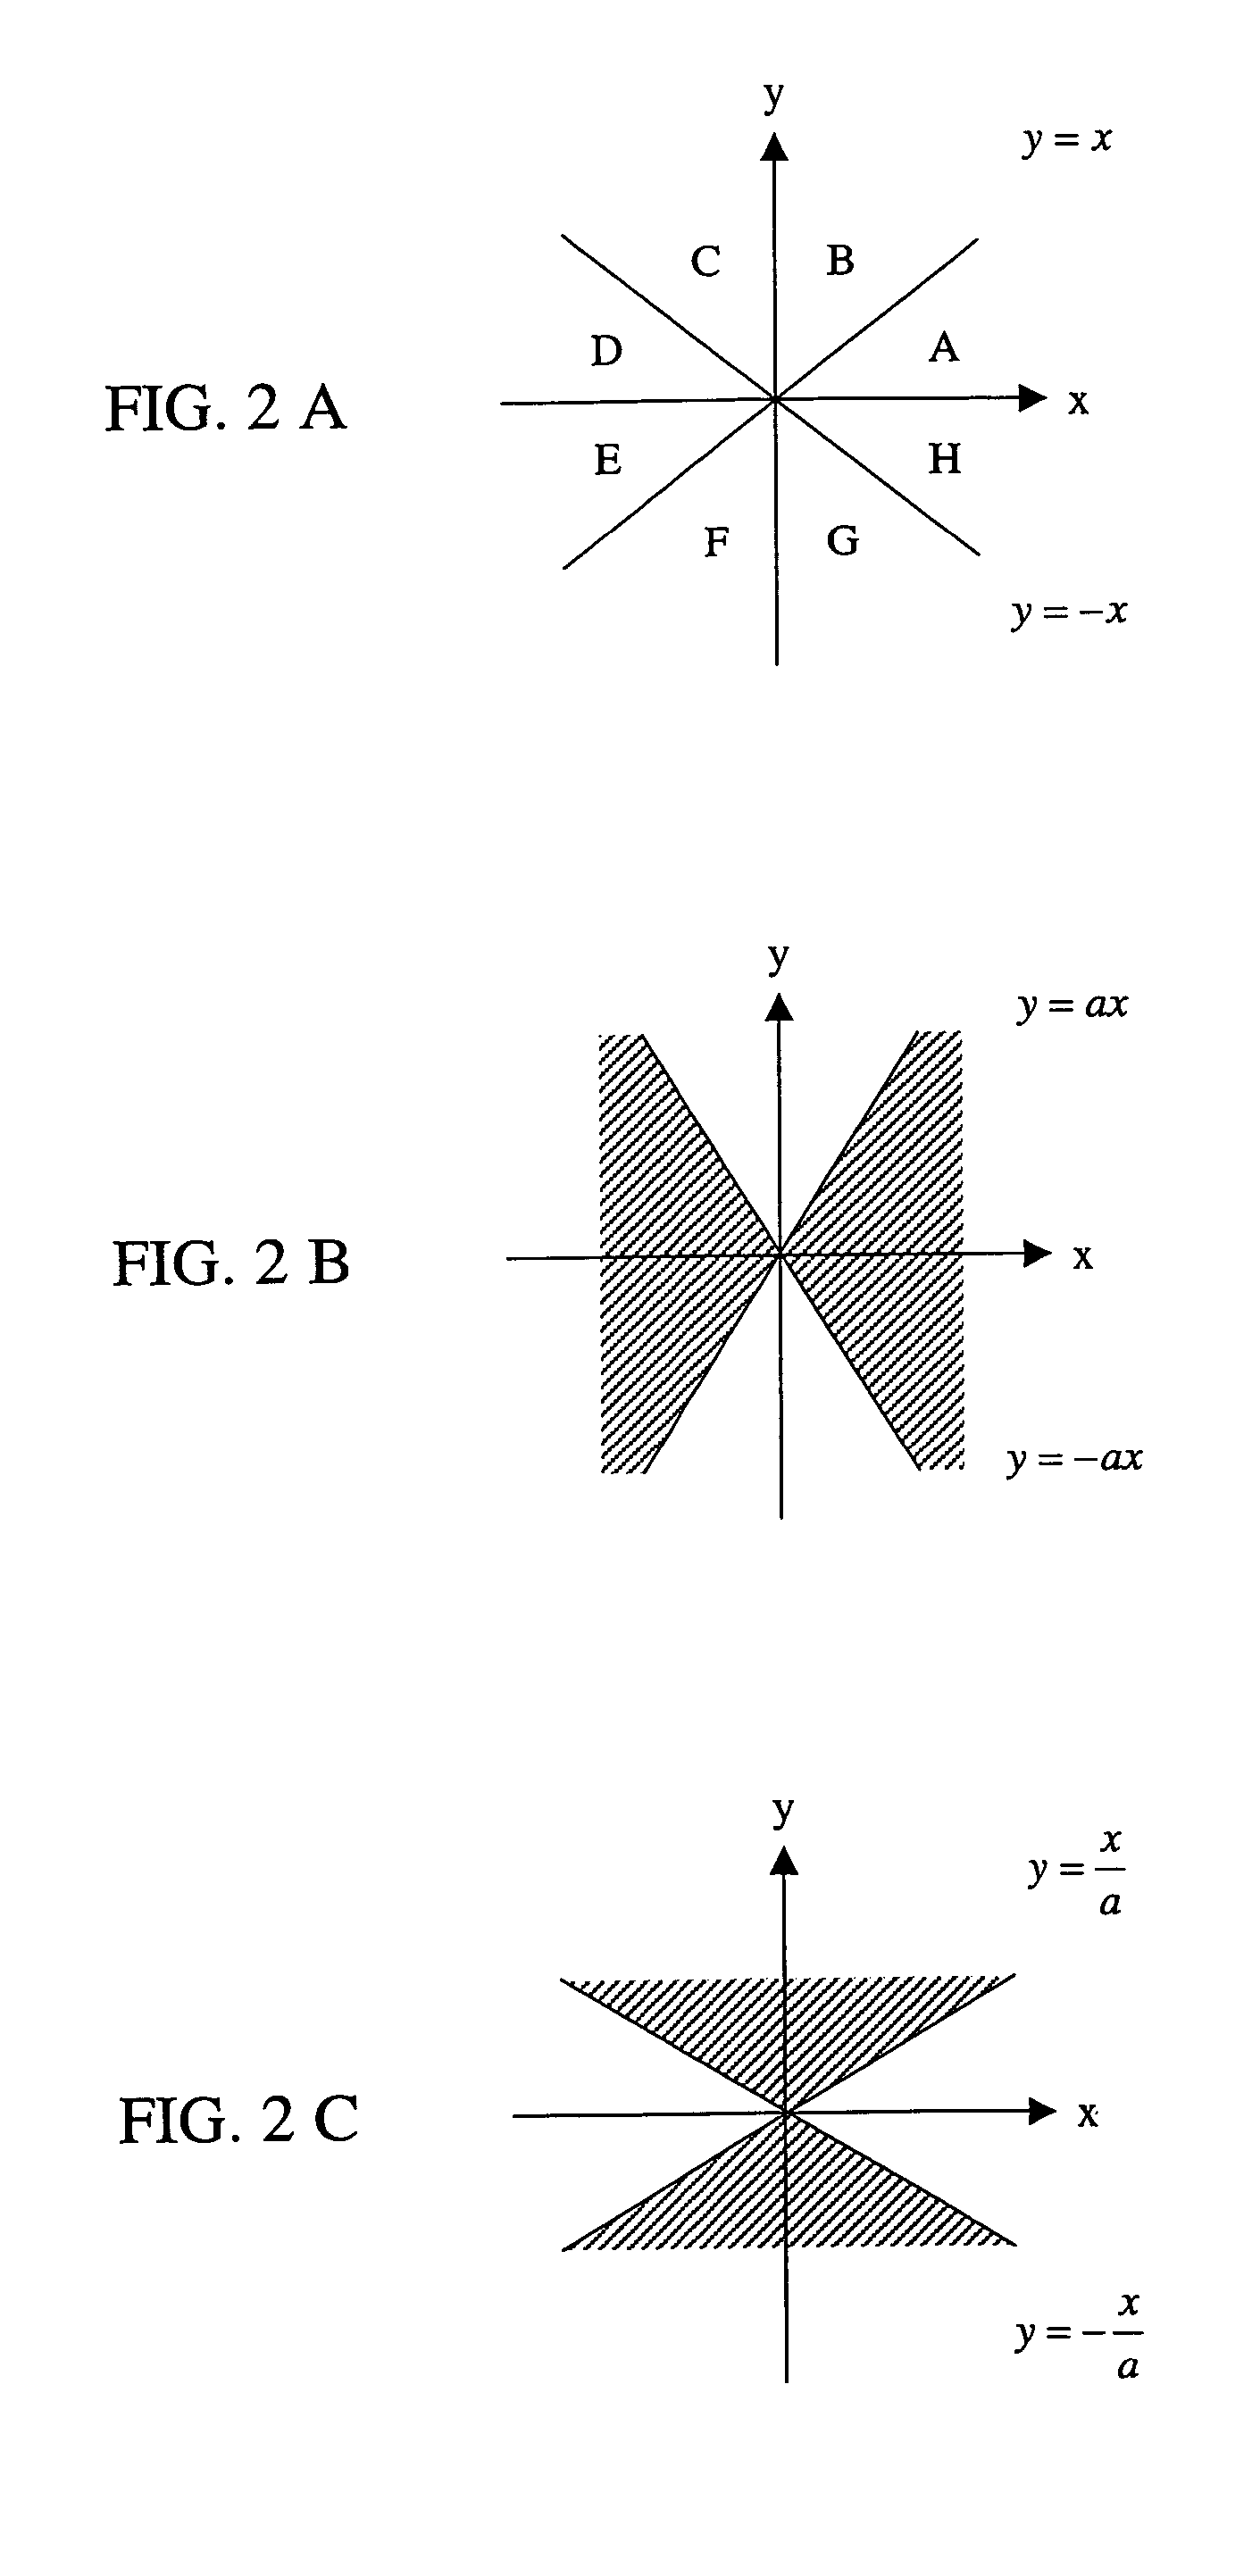 Coordinate-based display object movement restriction method